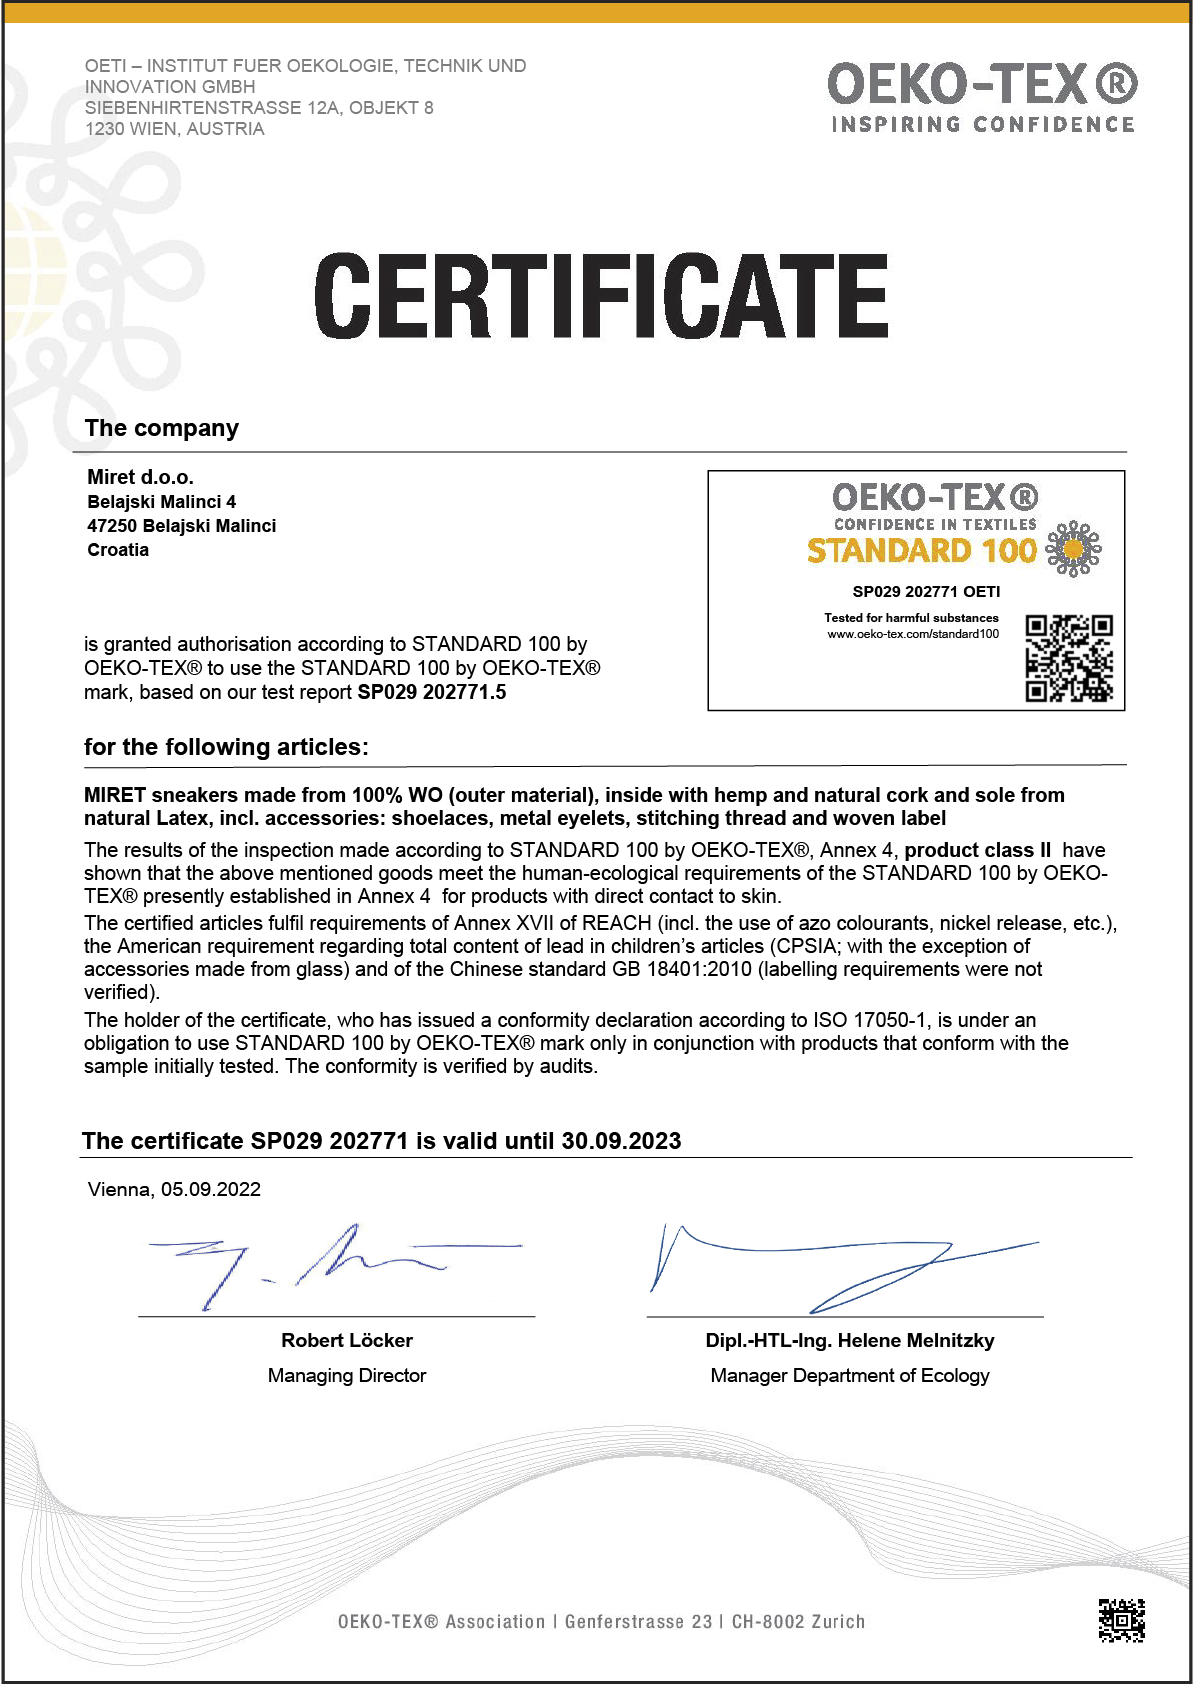 Backed by evidence: Earthbound is OEKO-TEX certified!